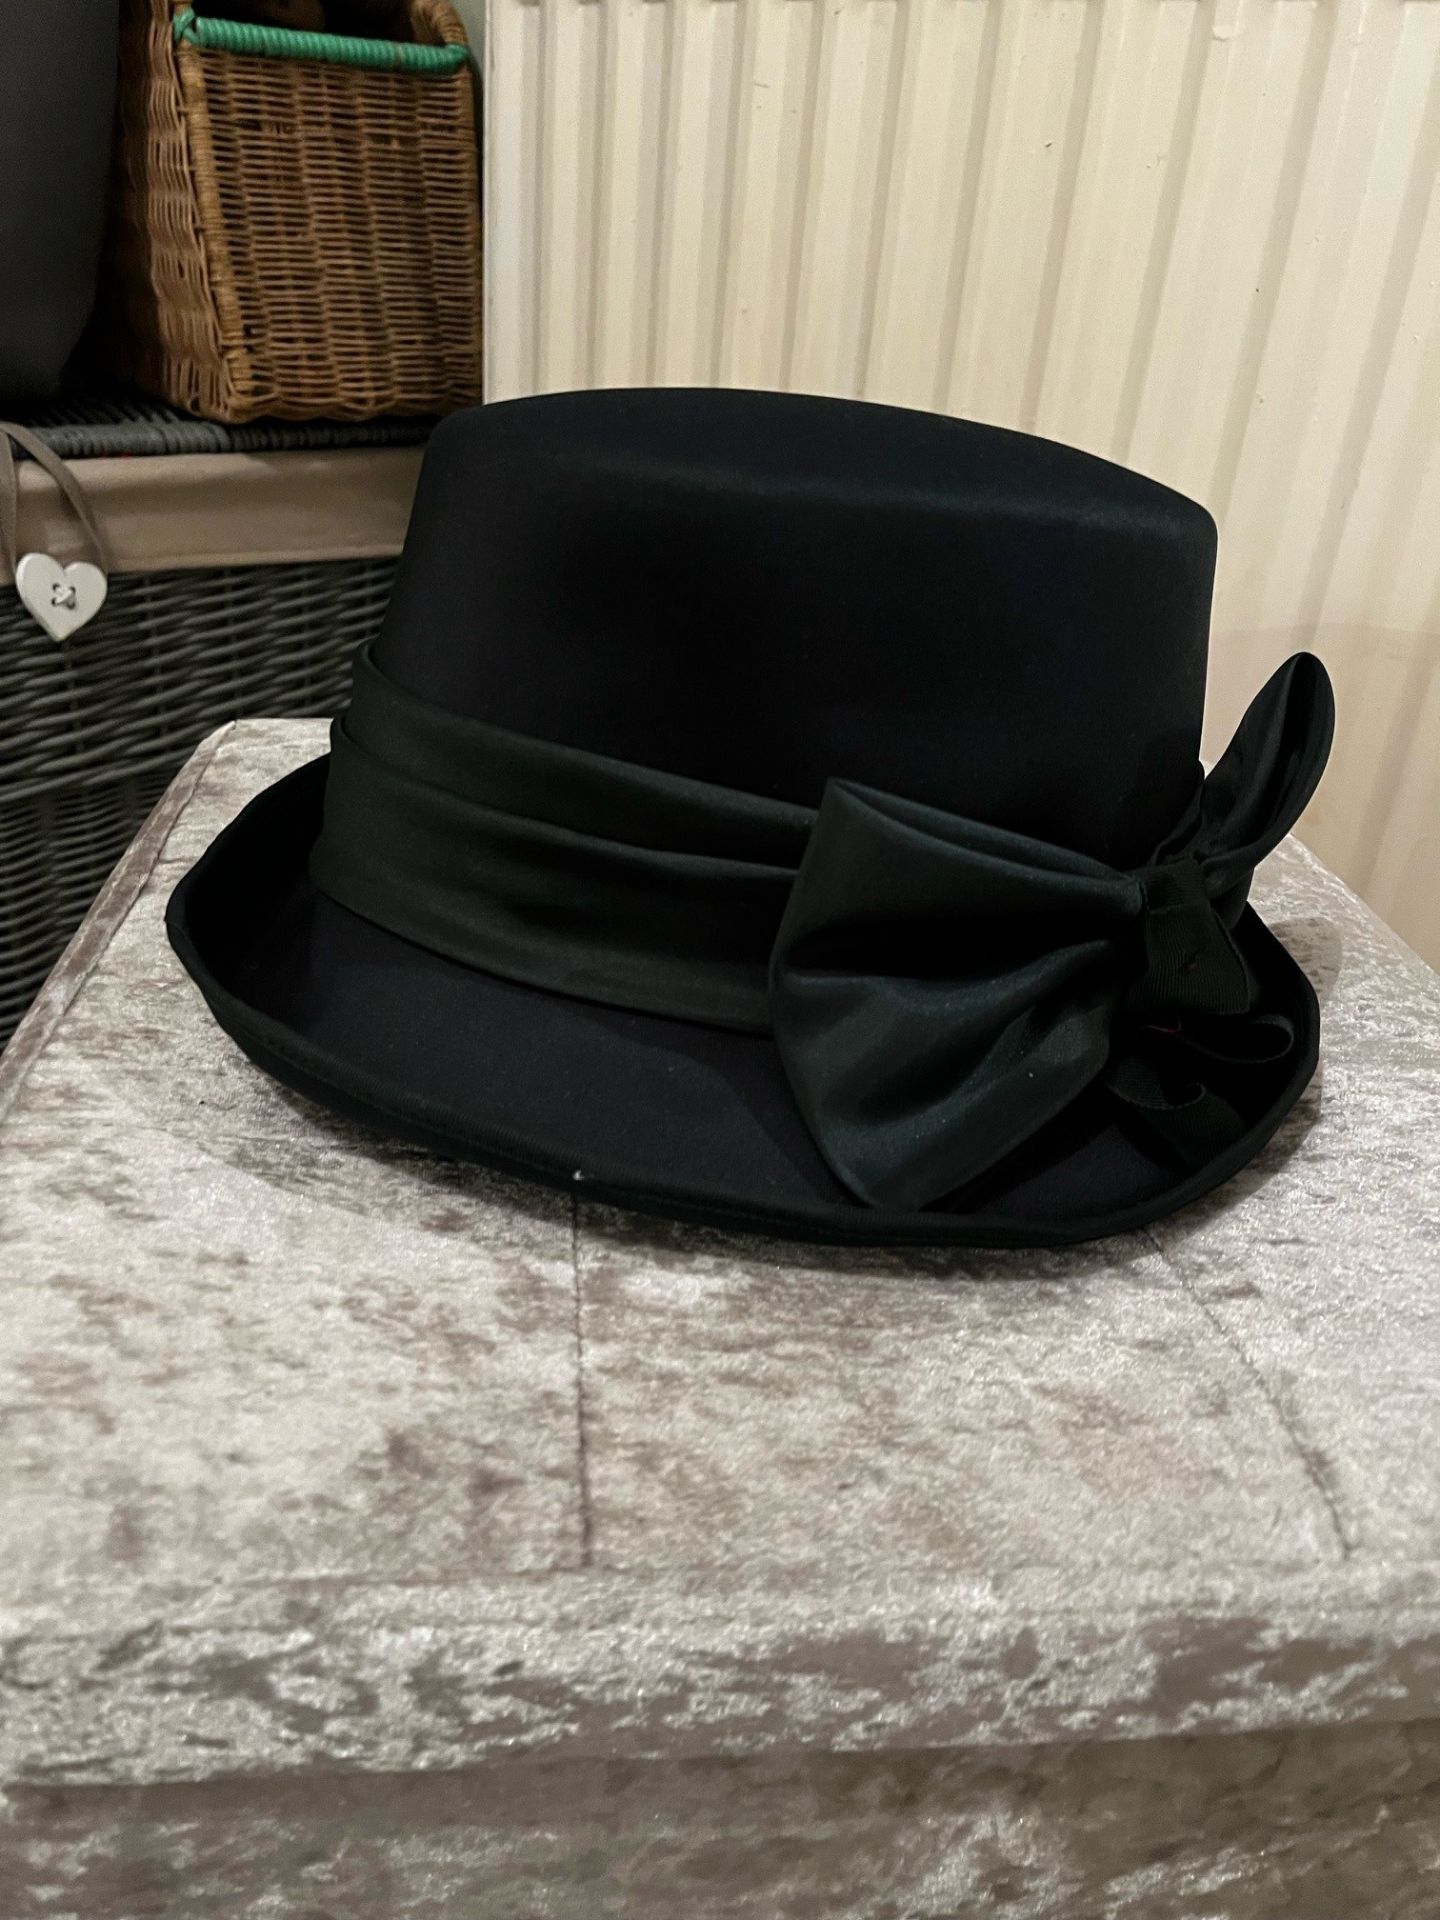 Two hats suitable for private driving, one dark green and one red - Bild 2 aus 4